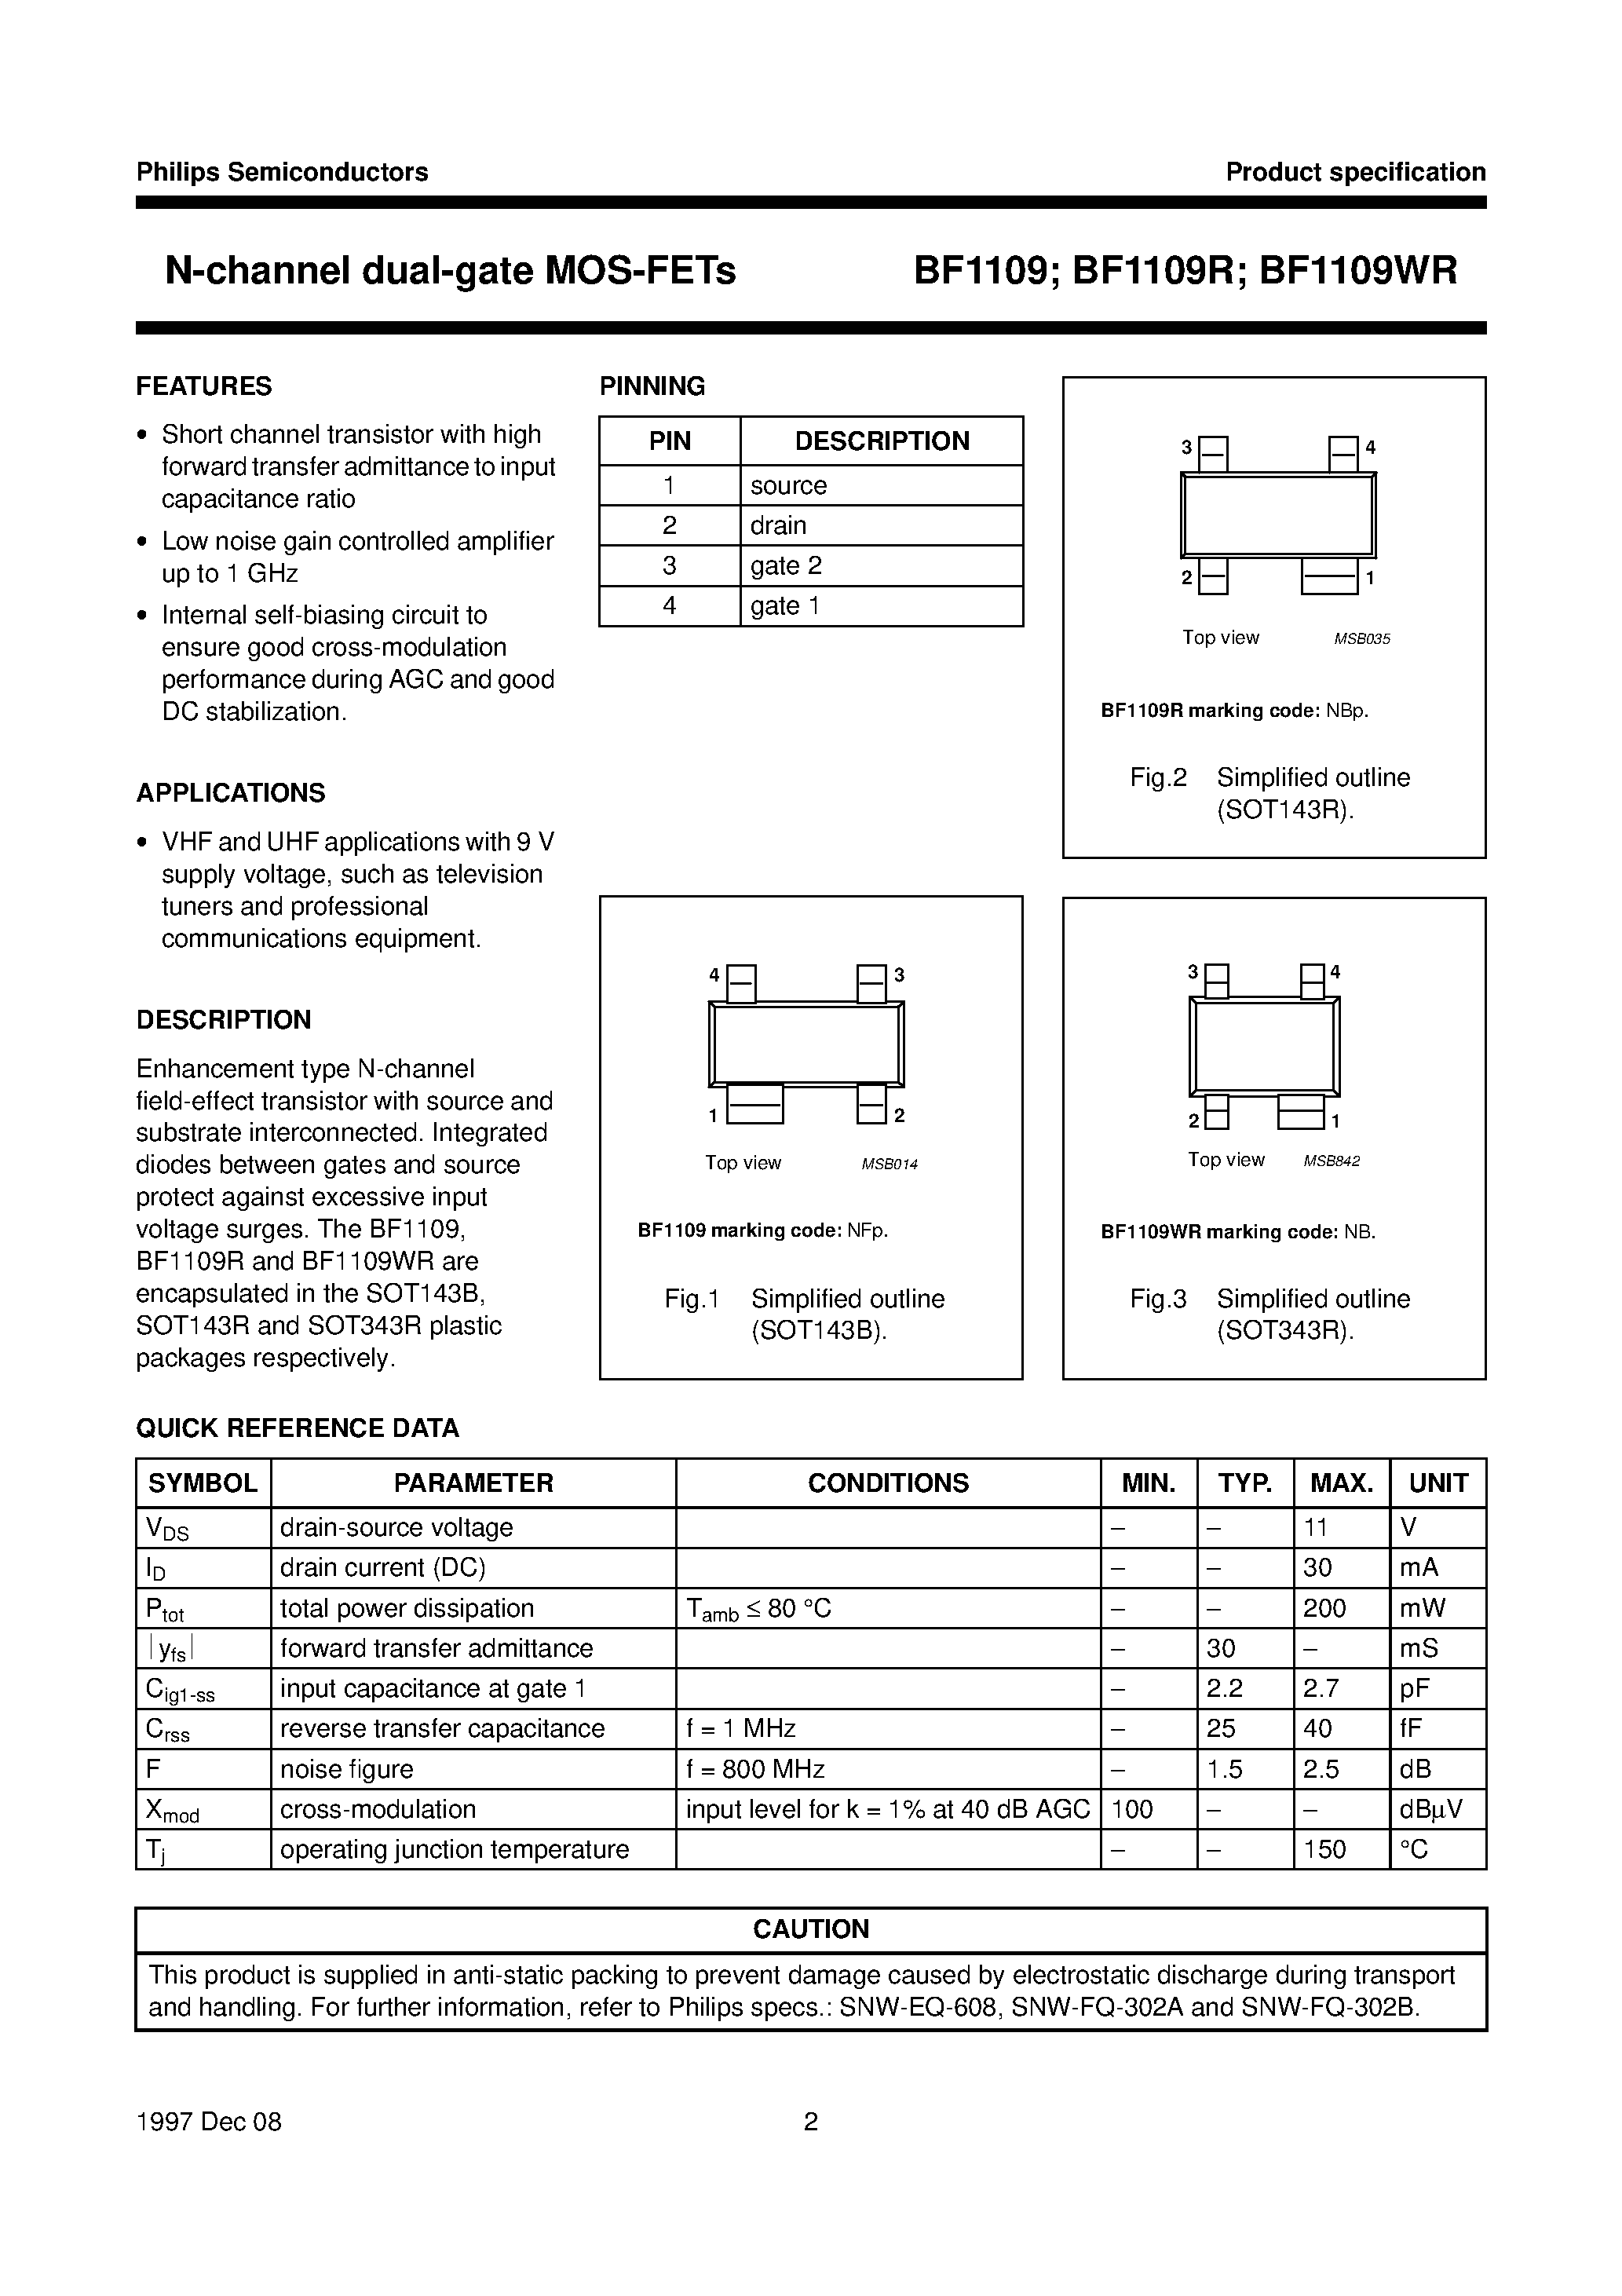 Datasheet BF1109 - N-channel dual-gate MOS-FETs page 2